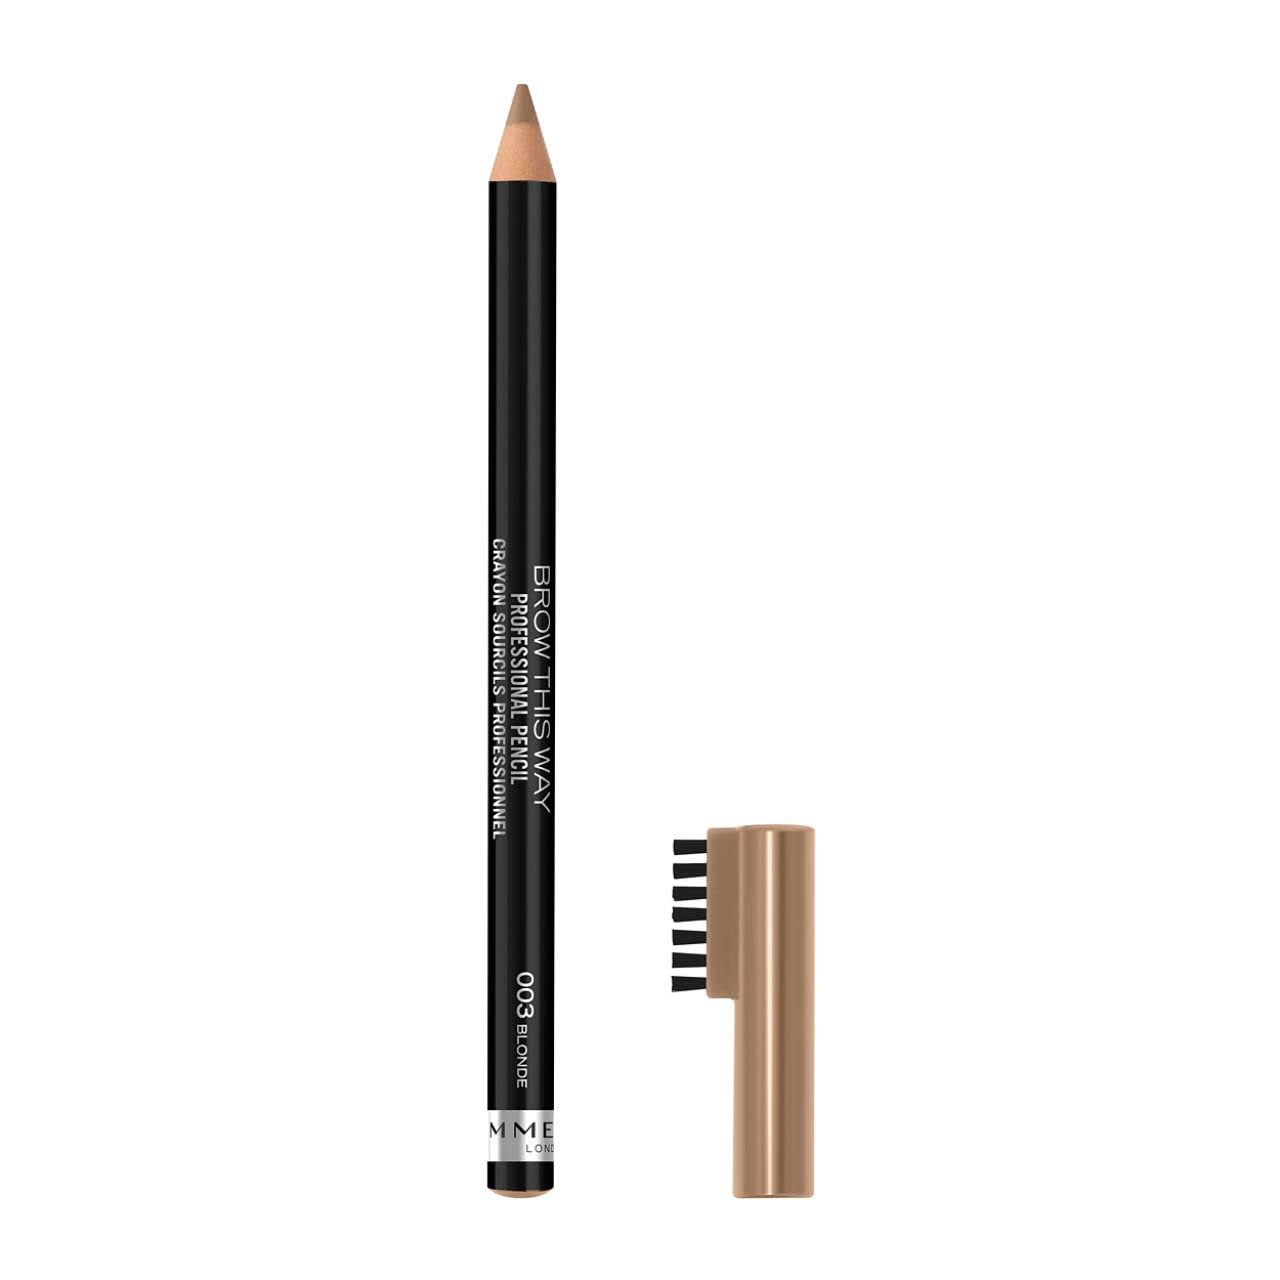 Rimmel London Brow This Way Professional Brow Pencil 003 Blonde 1.4g